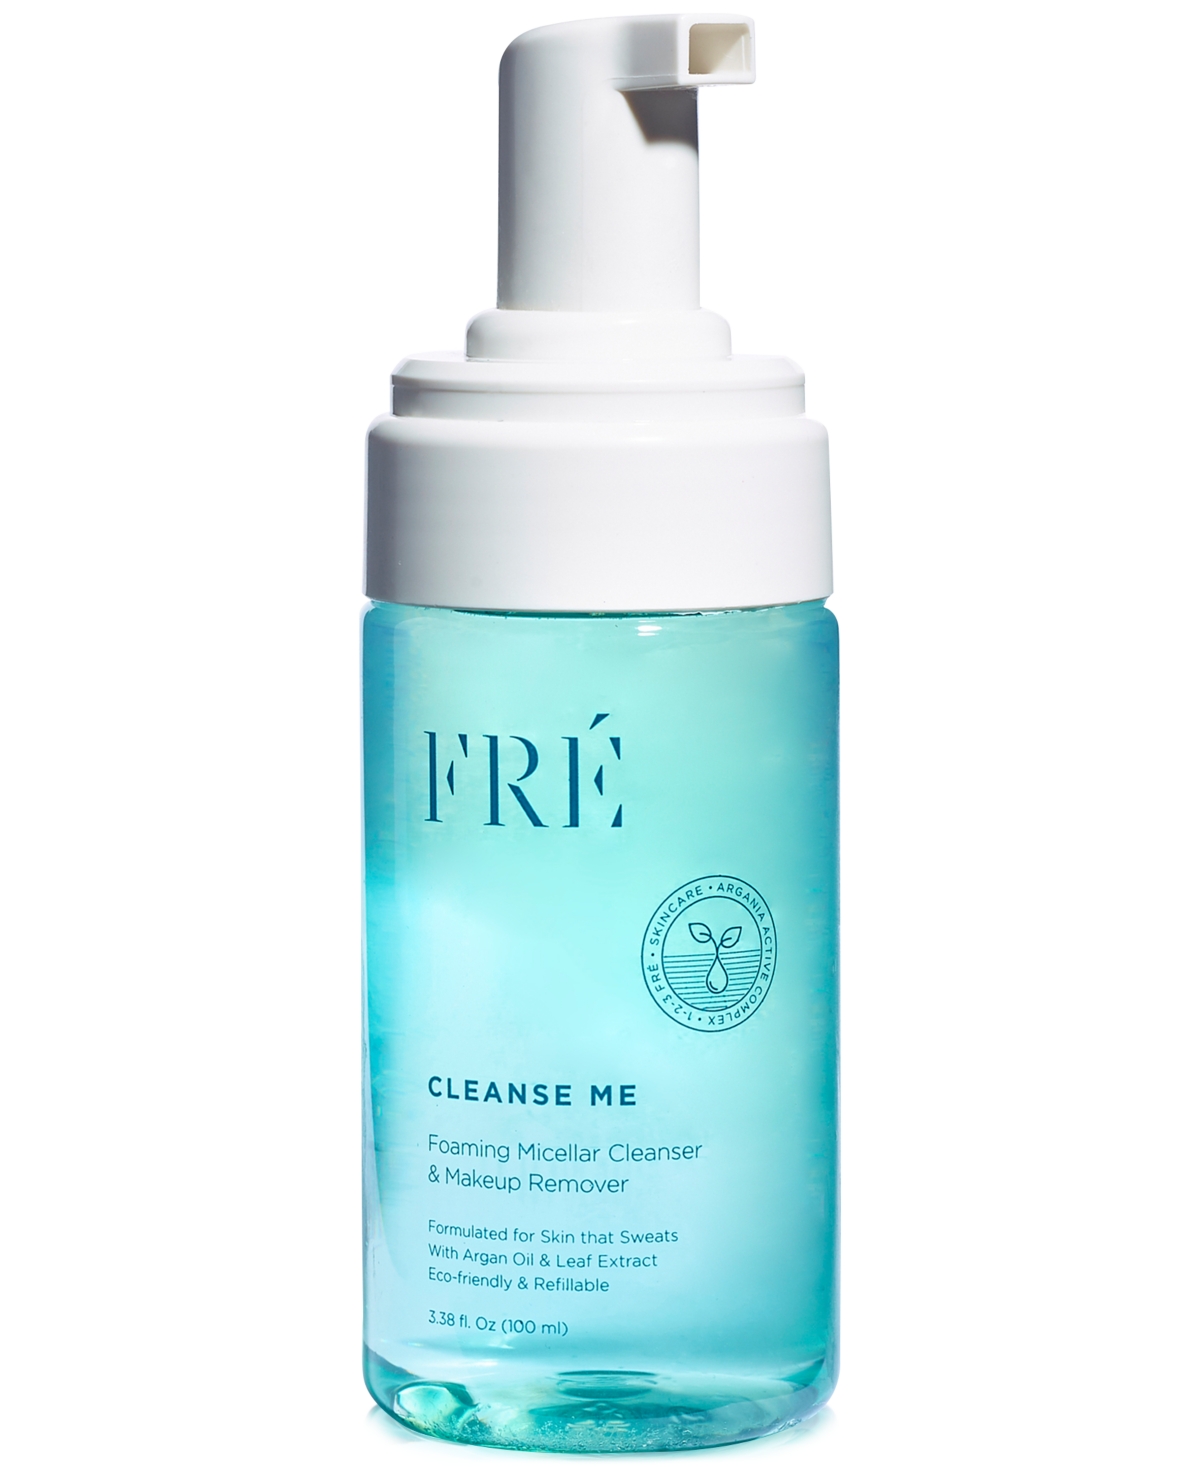 Cleanse Me Foaming Micellar Cleanser, 3.38oz.